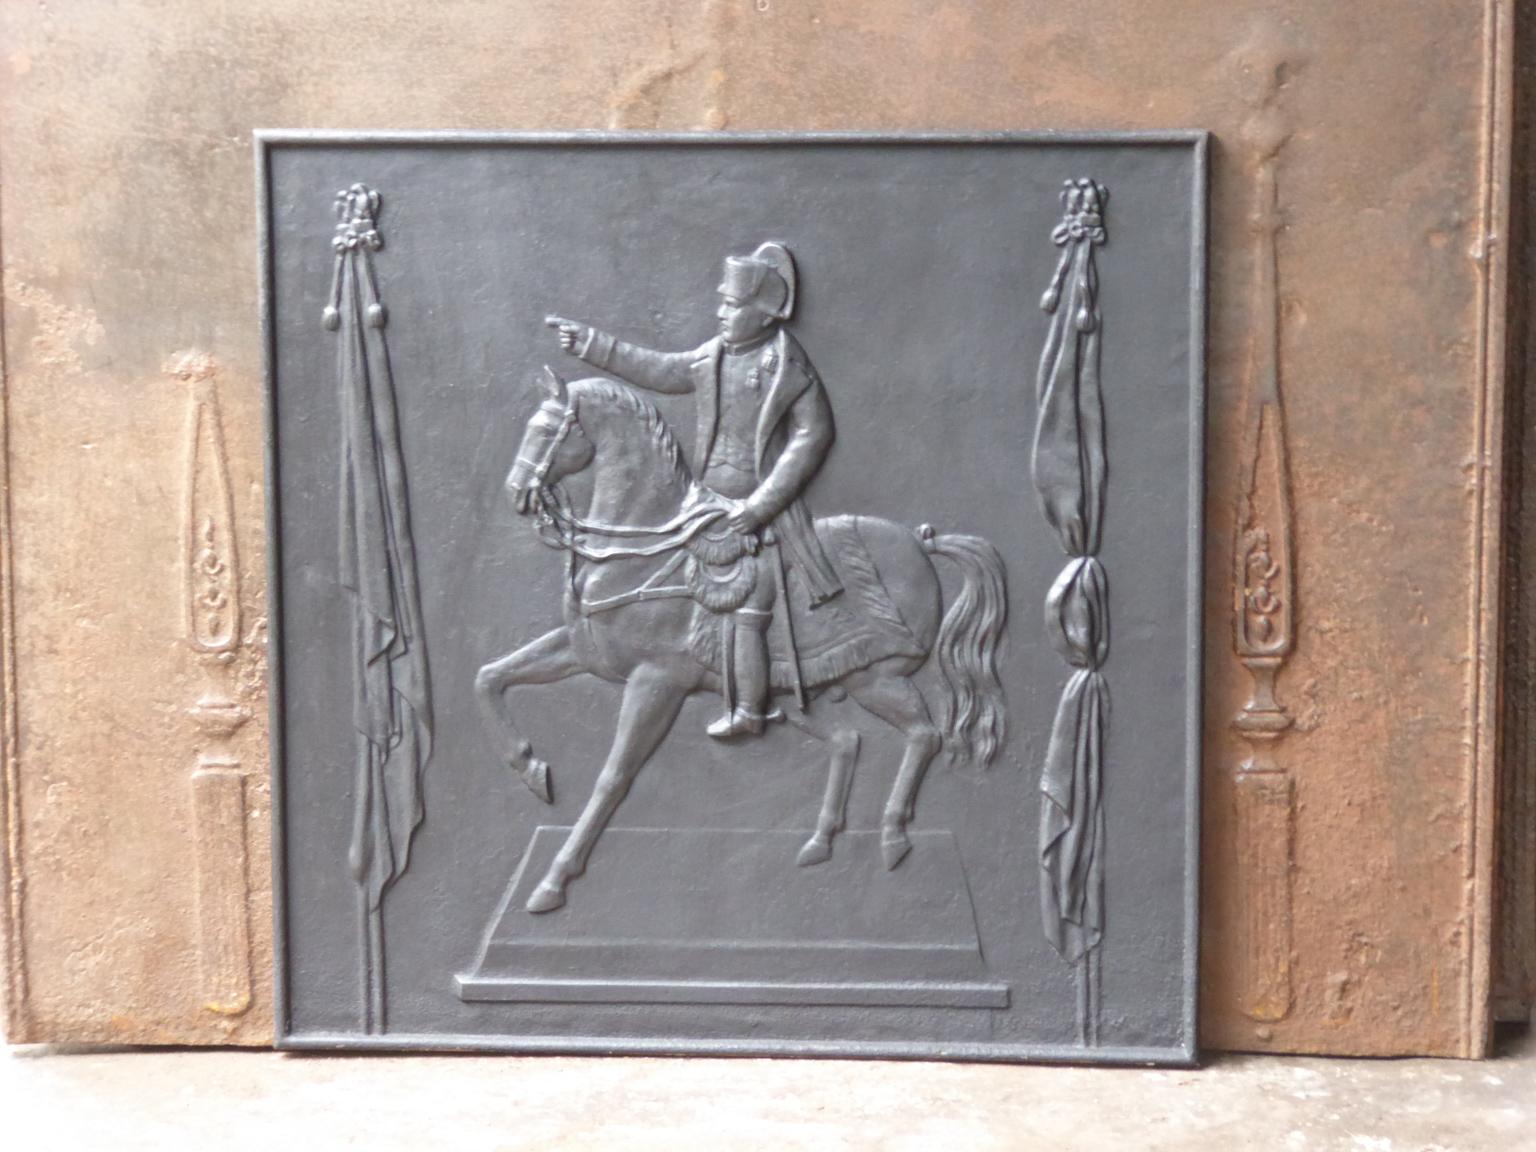 20th century French Napoleon III style fireback with Napoleon on his horse.

The fireback is made of cast iron and has a black / pewter patina. It is in a good condition and does not have cracks.